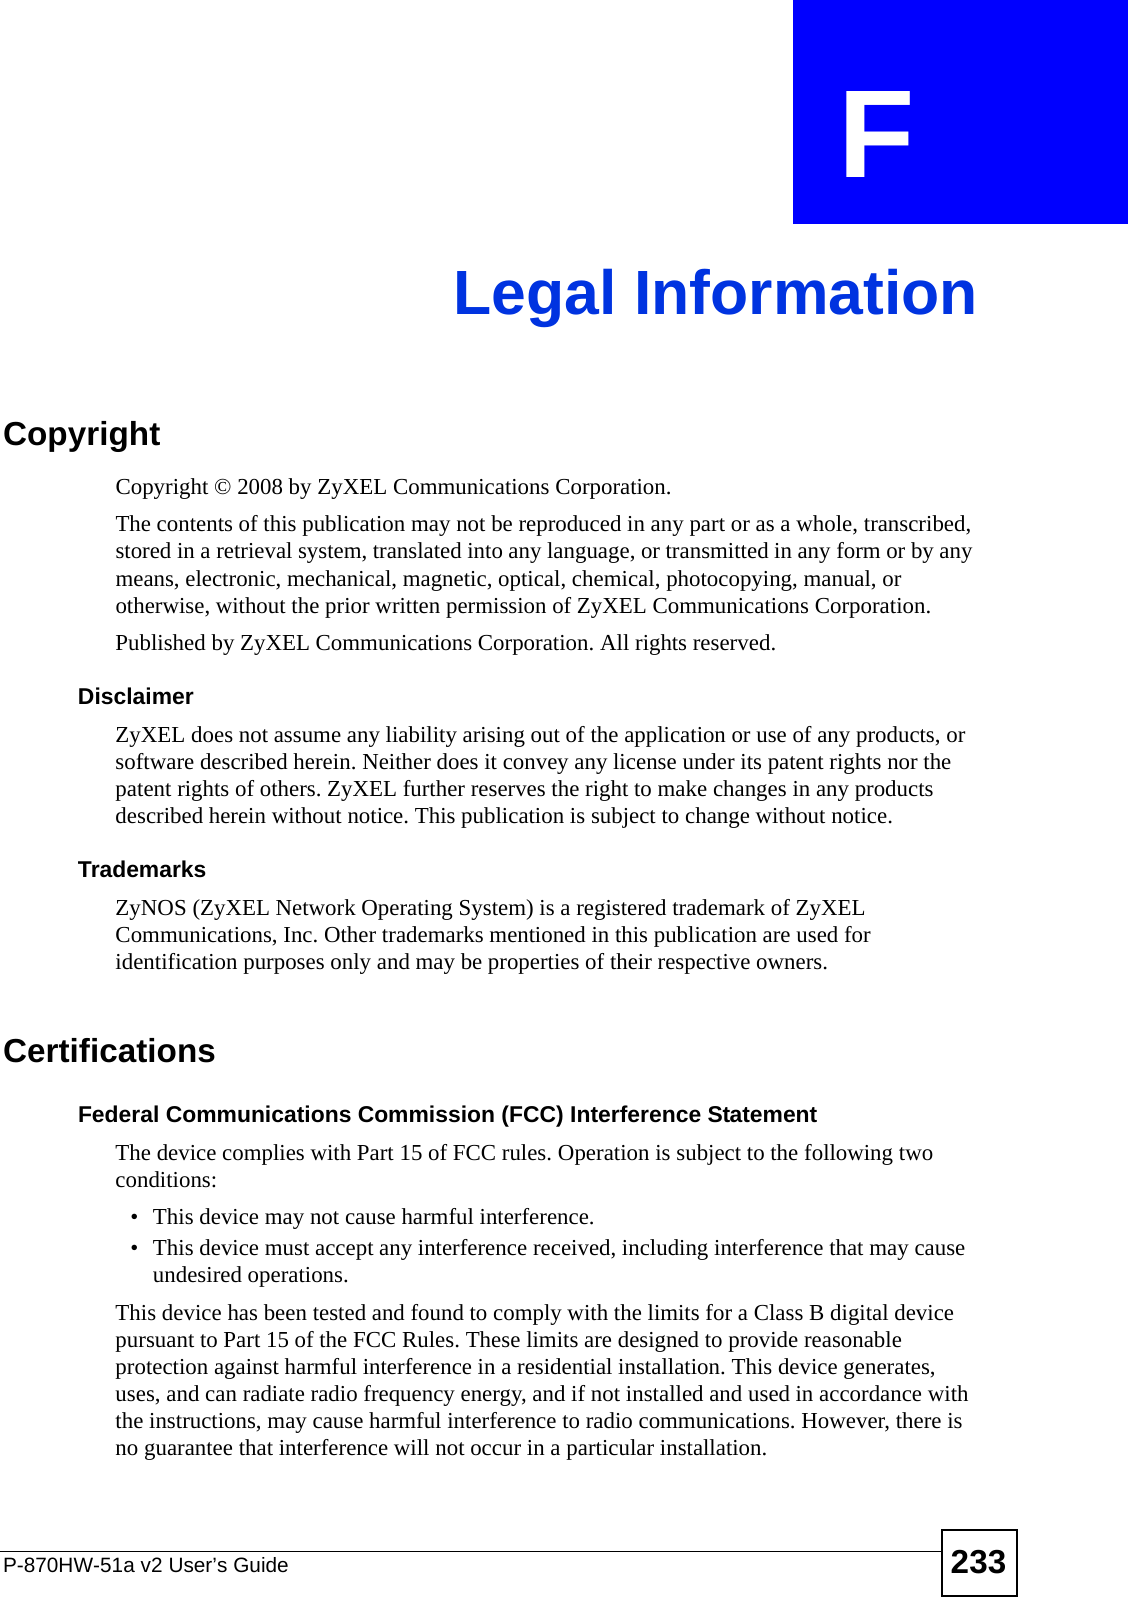 P-870HW-51a v2 User’s Guide 233APPENDIX  F Legal InformationCopyrightCopyright © 2008 by ZyXEL Communications Corporation.The contents of this publication may not be reproduced in any part or as a whole, transcribed, stored in a retrieval system, translated into any language, or transmitted in any form or by any means, electronic, mechanical, magnetic, optical, chemical, photocopying, manual, or otherwise, without the prior written permission of ZyXEL Communications Corporation.Published by ZyXEL Communications Corporation. All rights reserved.DisclaimerZyXEL does not assume any liability arising out of the application or use of any products, or software described herein. Neither does it convey any license under its patent rights nor the patent rights of others. ZyXEL further reserves the right to make changes in any products described herein without notice. This publication is subject to change without notice.TrademarksZyNOS (ZyXEL Network Operating System) is a registered trademark of ZyXEL Communications, Inc. Other trademarks mentioned in this publication are used for identification purposes only and may be properties of their respective owners.Certifications Federal Communications Commission (FCC) Interference StatementThe device complies with Part 15 of FCC rules. Operation is subject to the following two conditions:• This device may not cause harmful interference.• This device must accept any interference received, including interference that may cause undesired operations.This device has been tested and found to comply with the limits for a Class B digital device pursuant to Part 15 of the FCC Rules. These limits are designed to provide reasonable protection against harmful interference in a residential installation. This device generates, uses, and can radiate radio frequency energy, and if not installed and used in accordance with the instructions, may cause harmful interference to radio communications. However, there is no guarantee that interference will not occur in a particular installation.